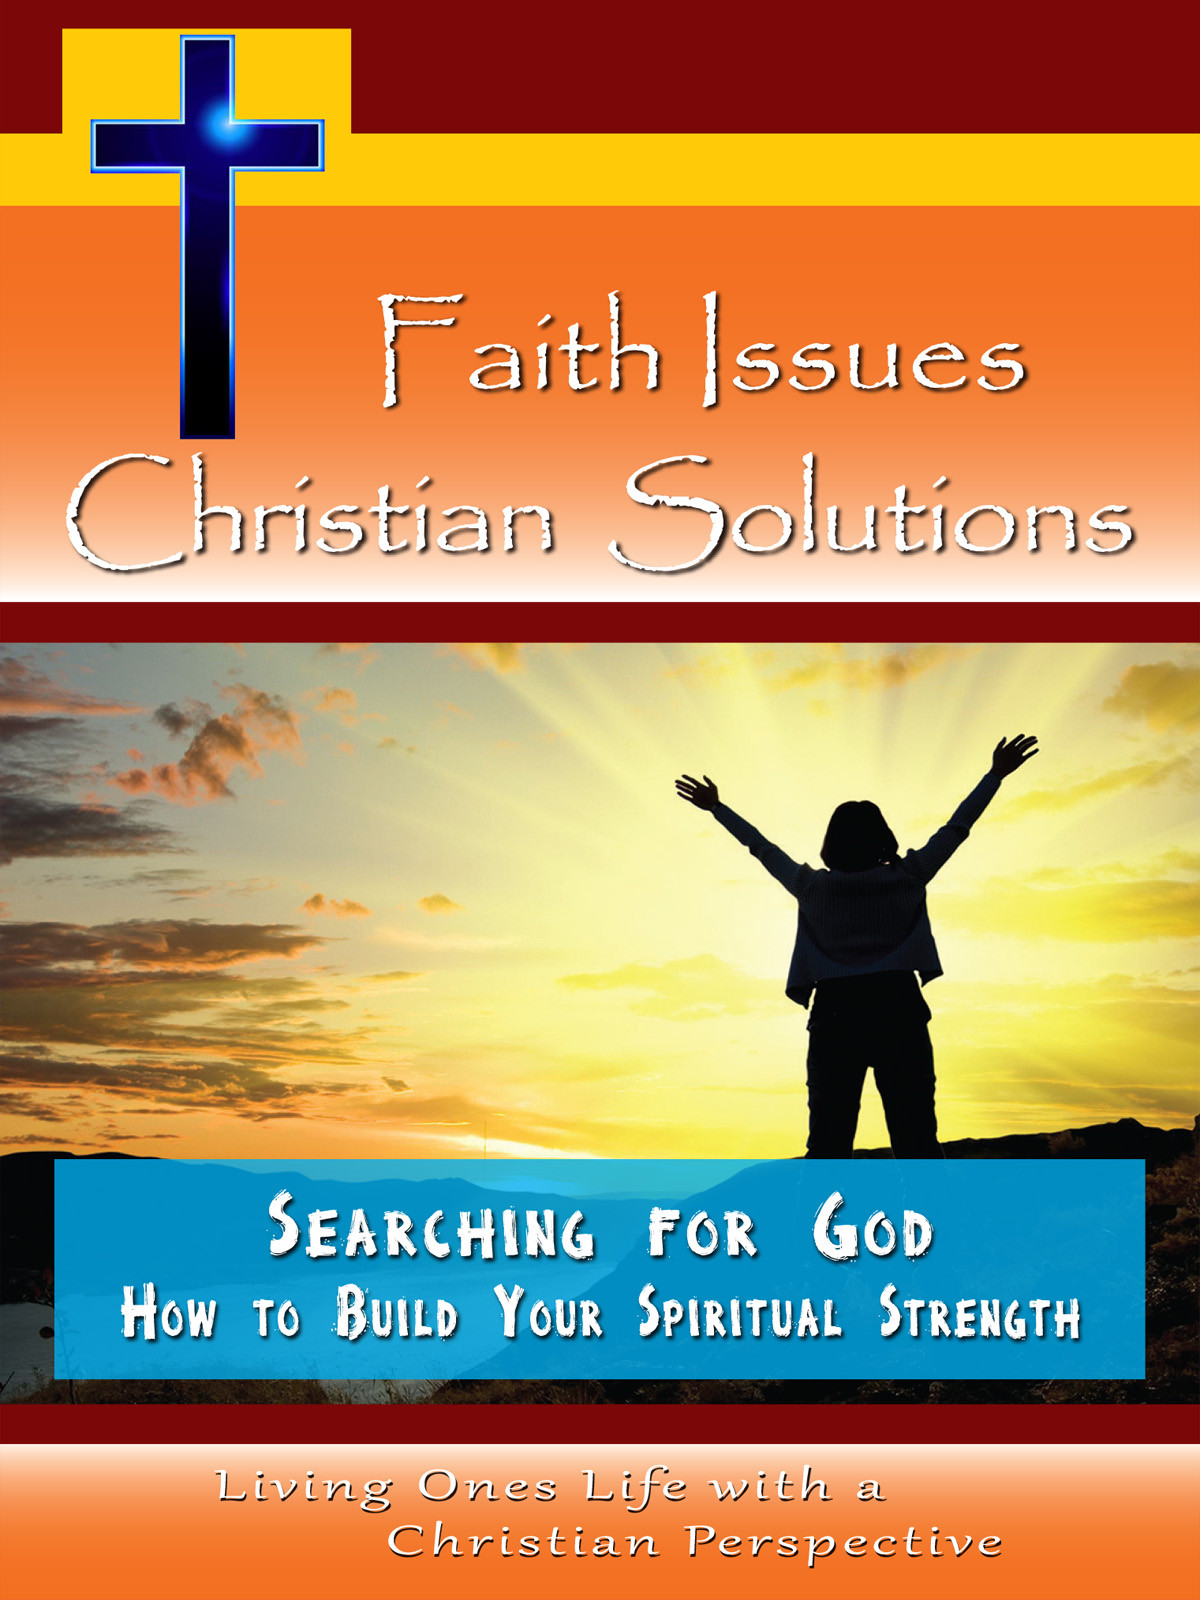 CH10025 - Searching for God How to Build Your Spiritual Strength